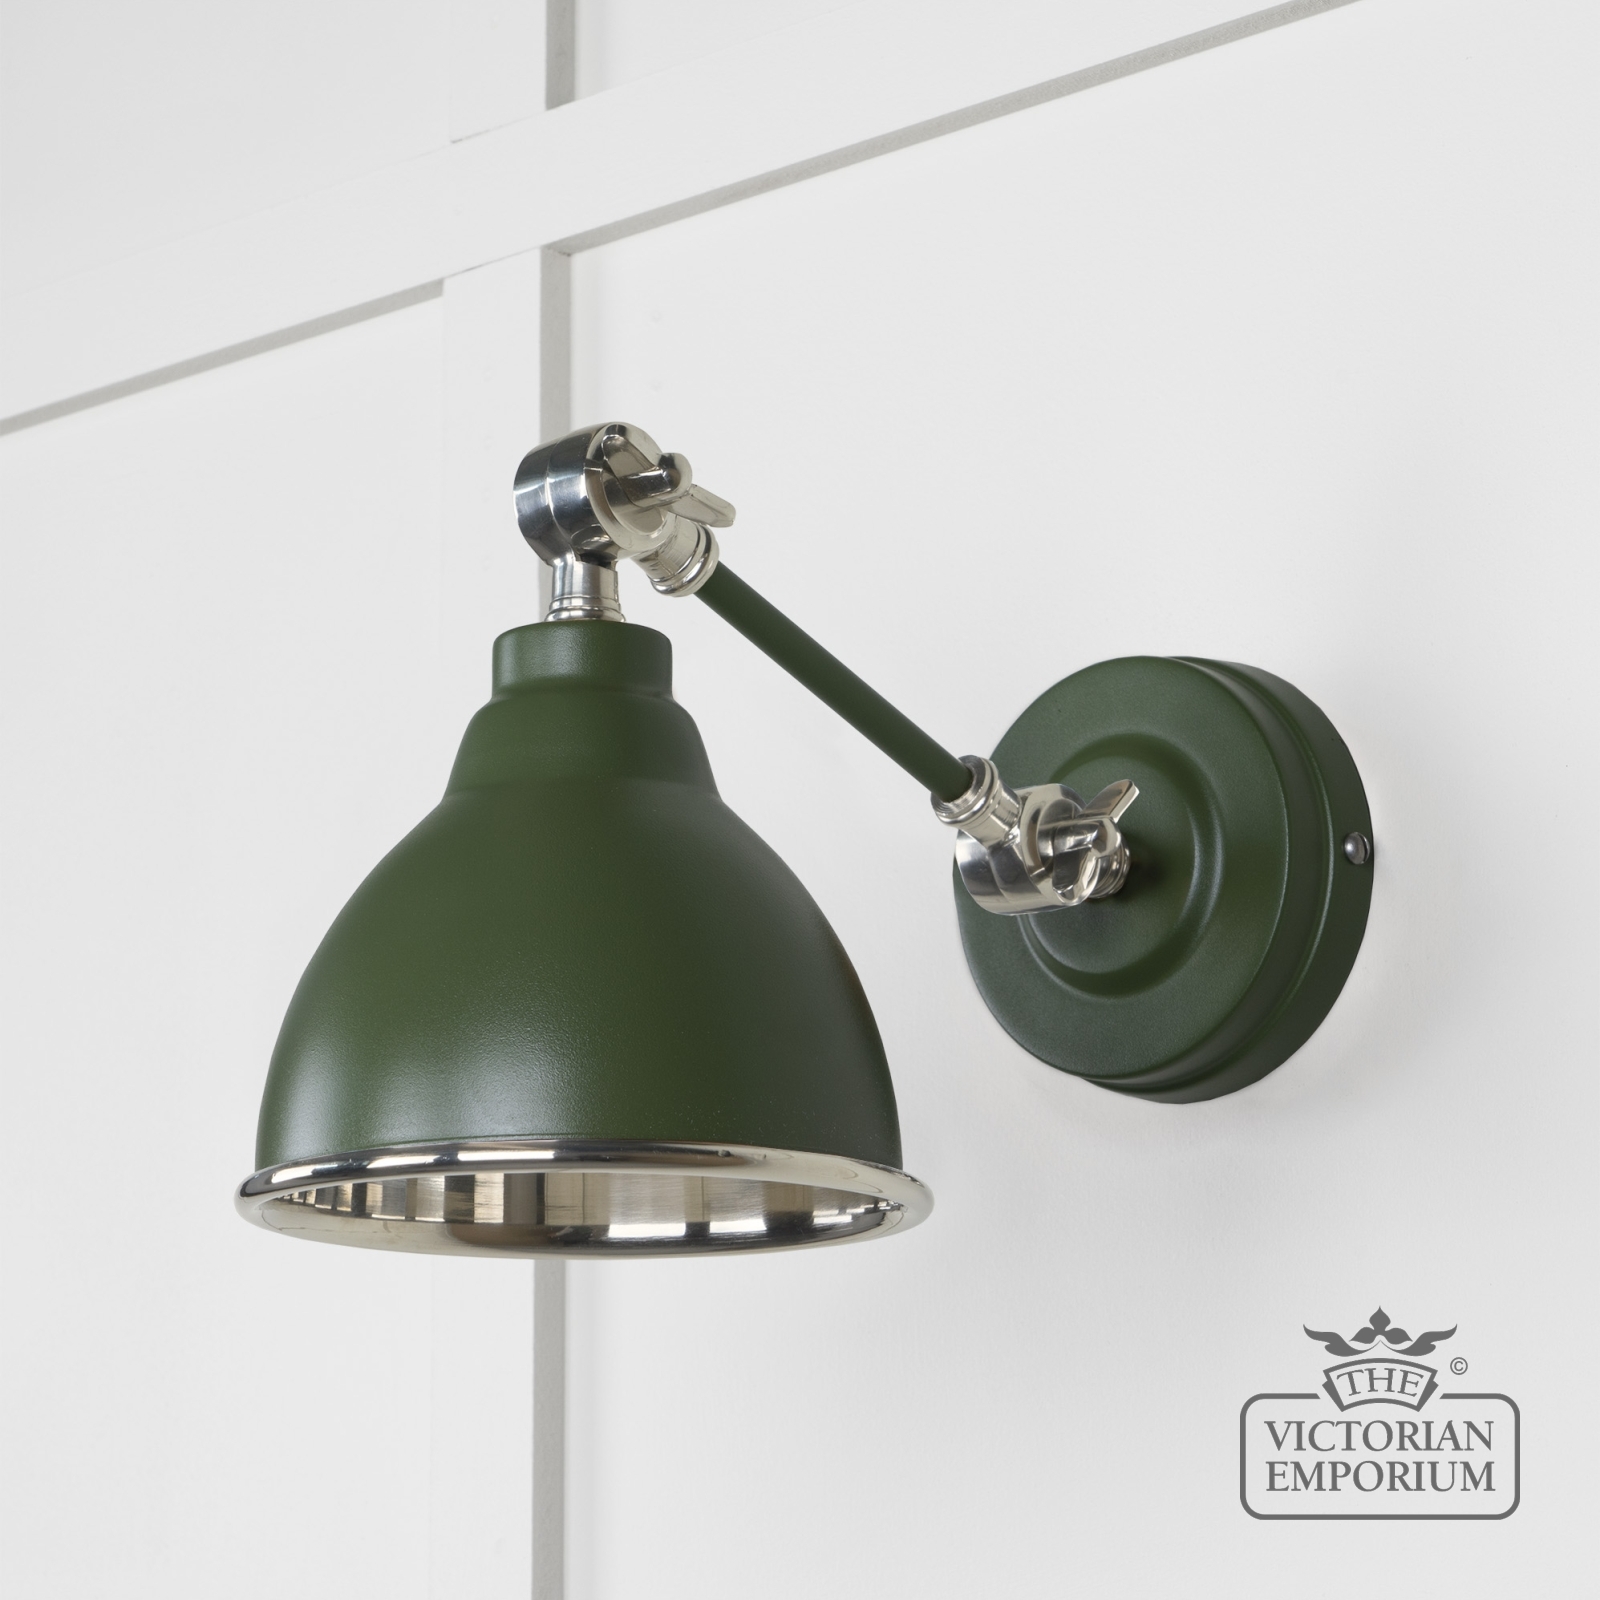 Brindle Wall Light with Smooth Nickel Interior and Heath Exterior